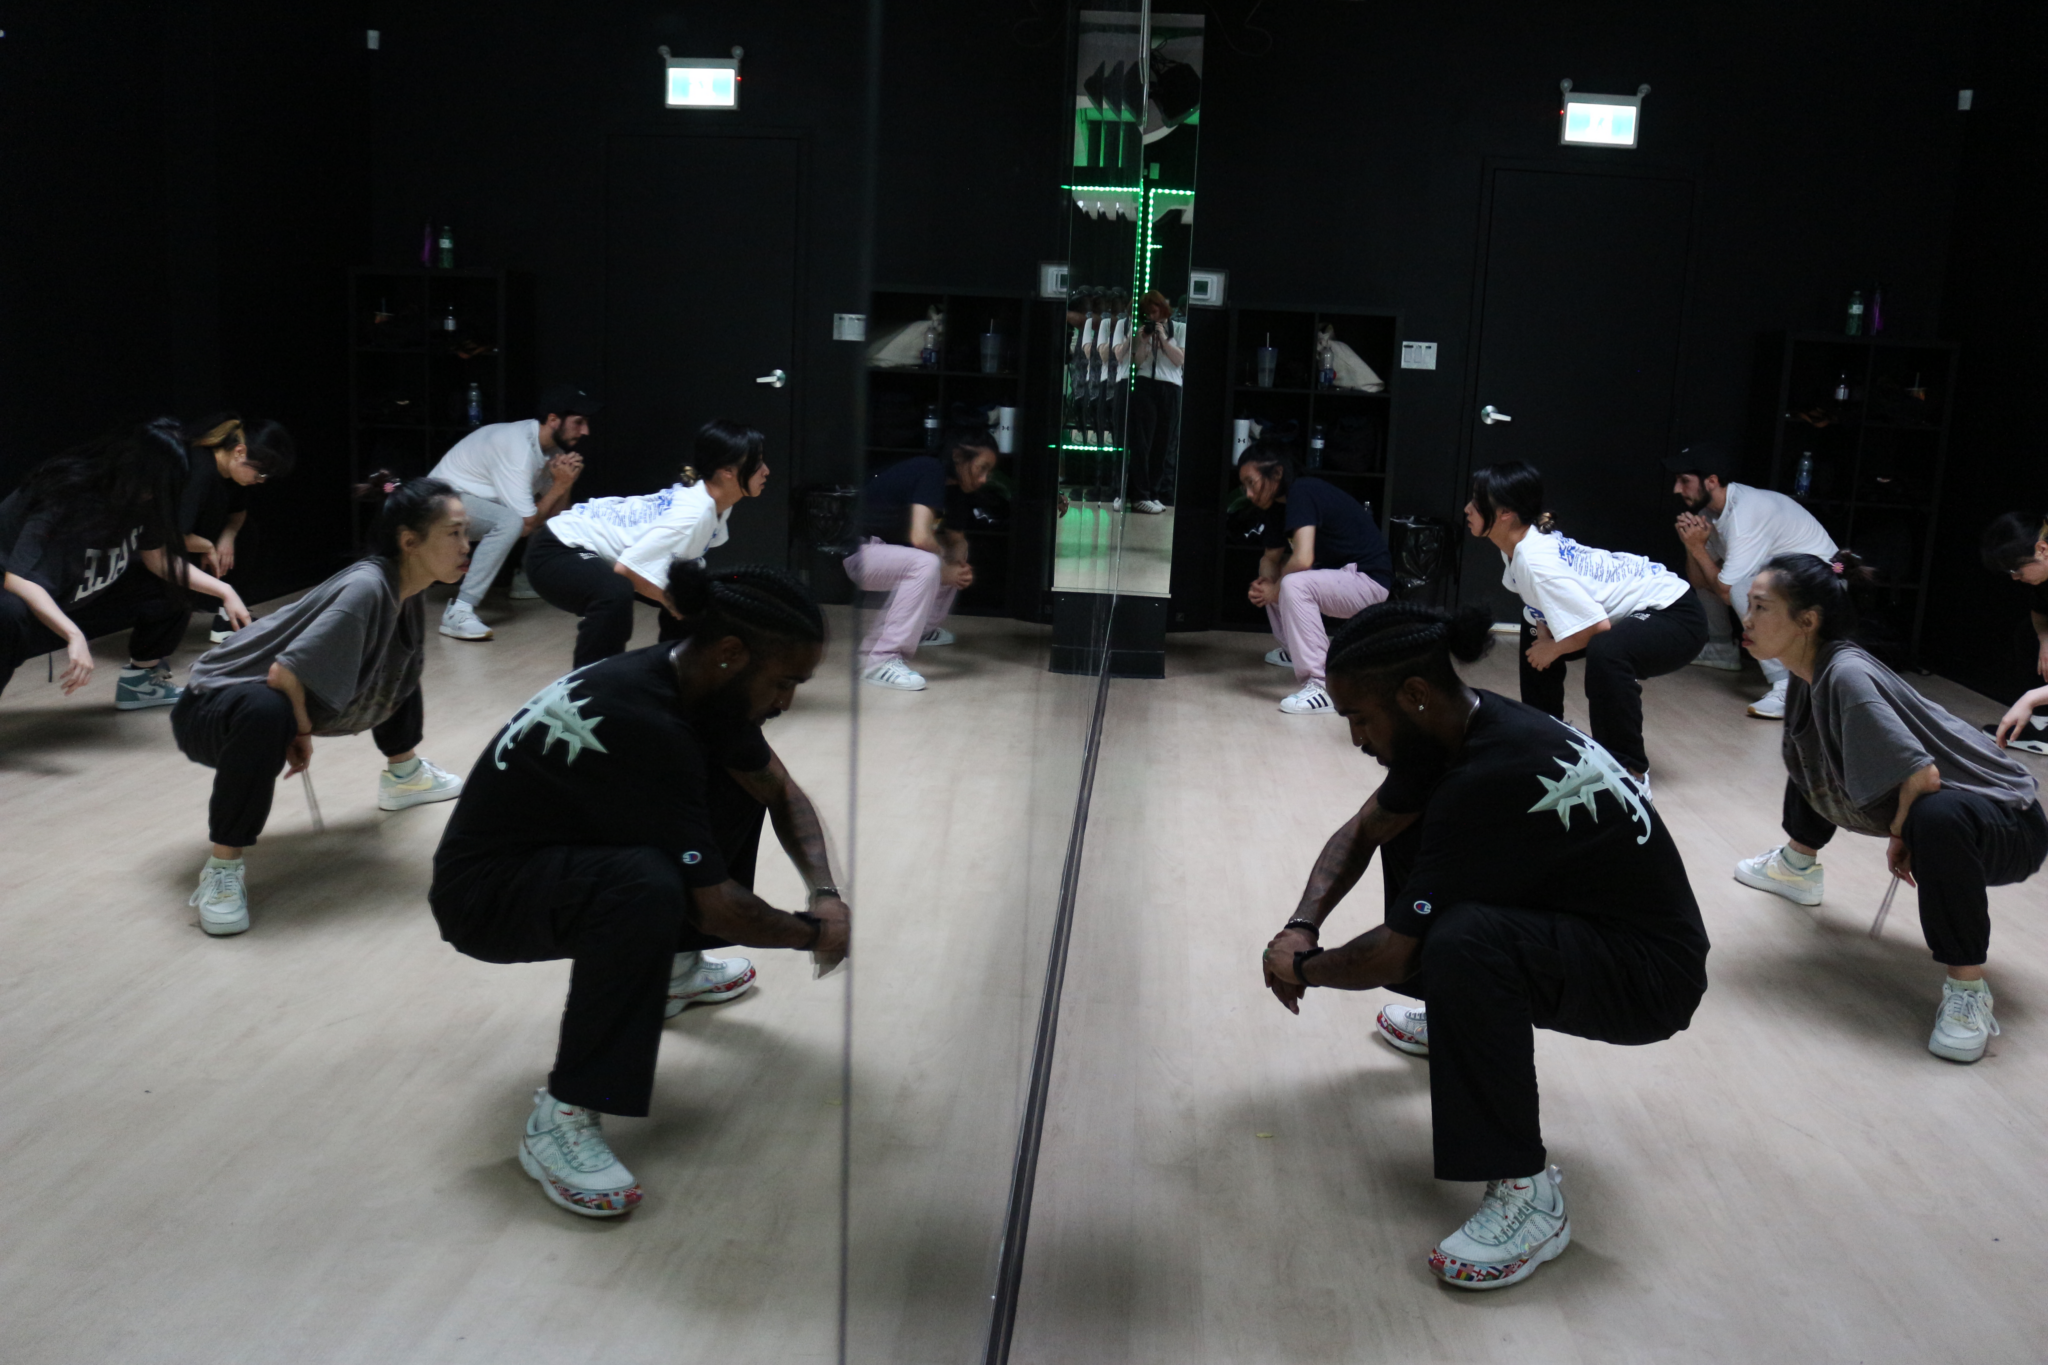 Dance students squat during a routine in a dance class.